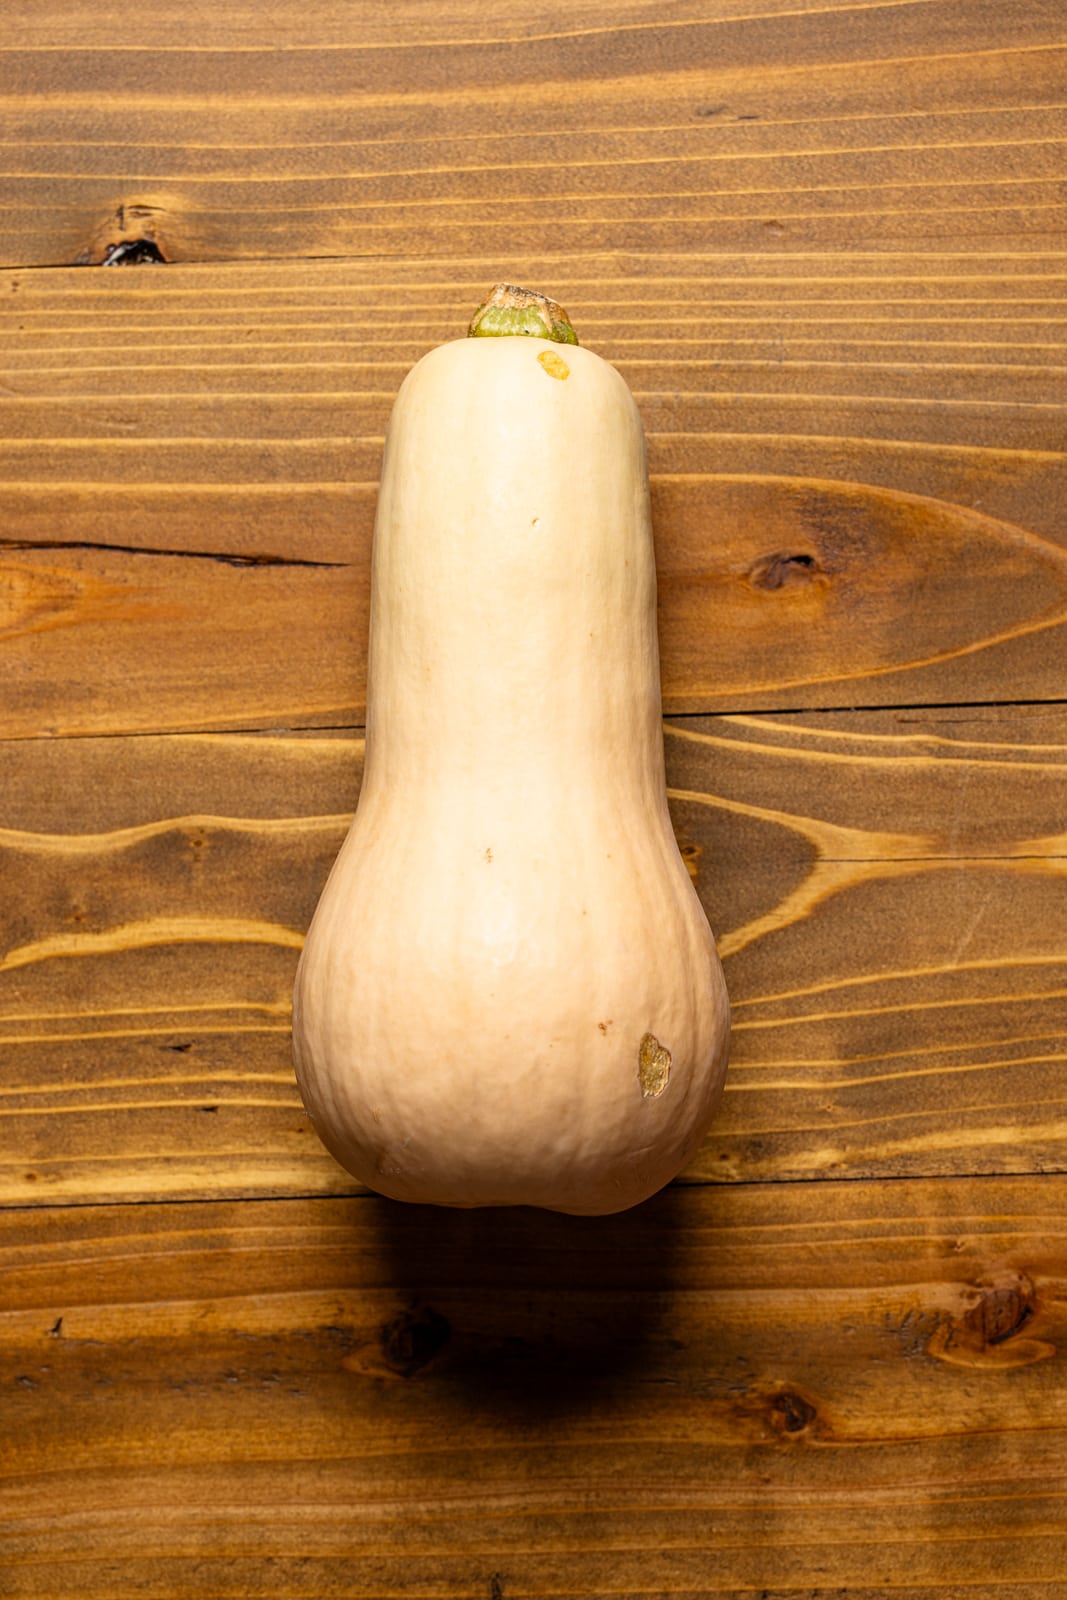 Butternut squash on a brown wood table.